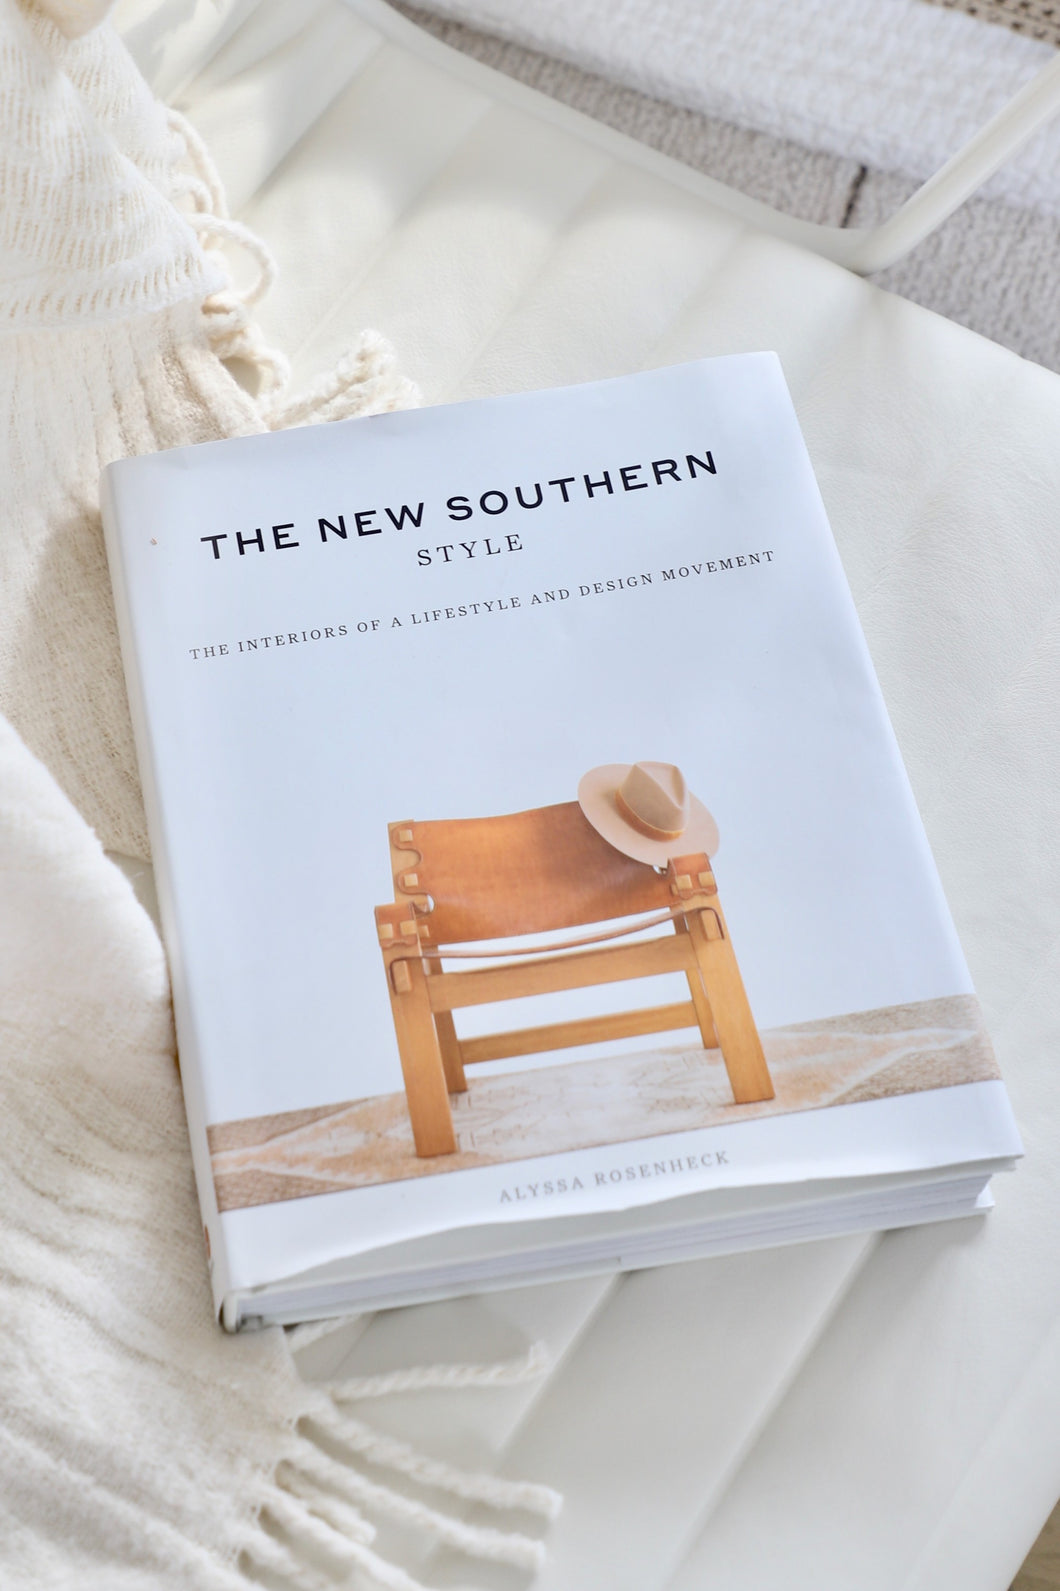 The New Southern Style